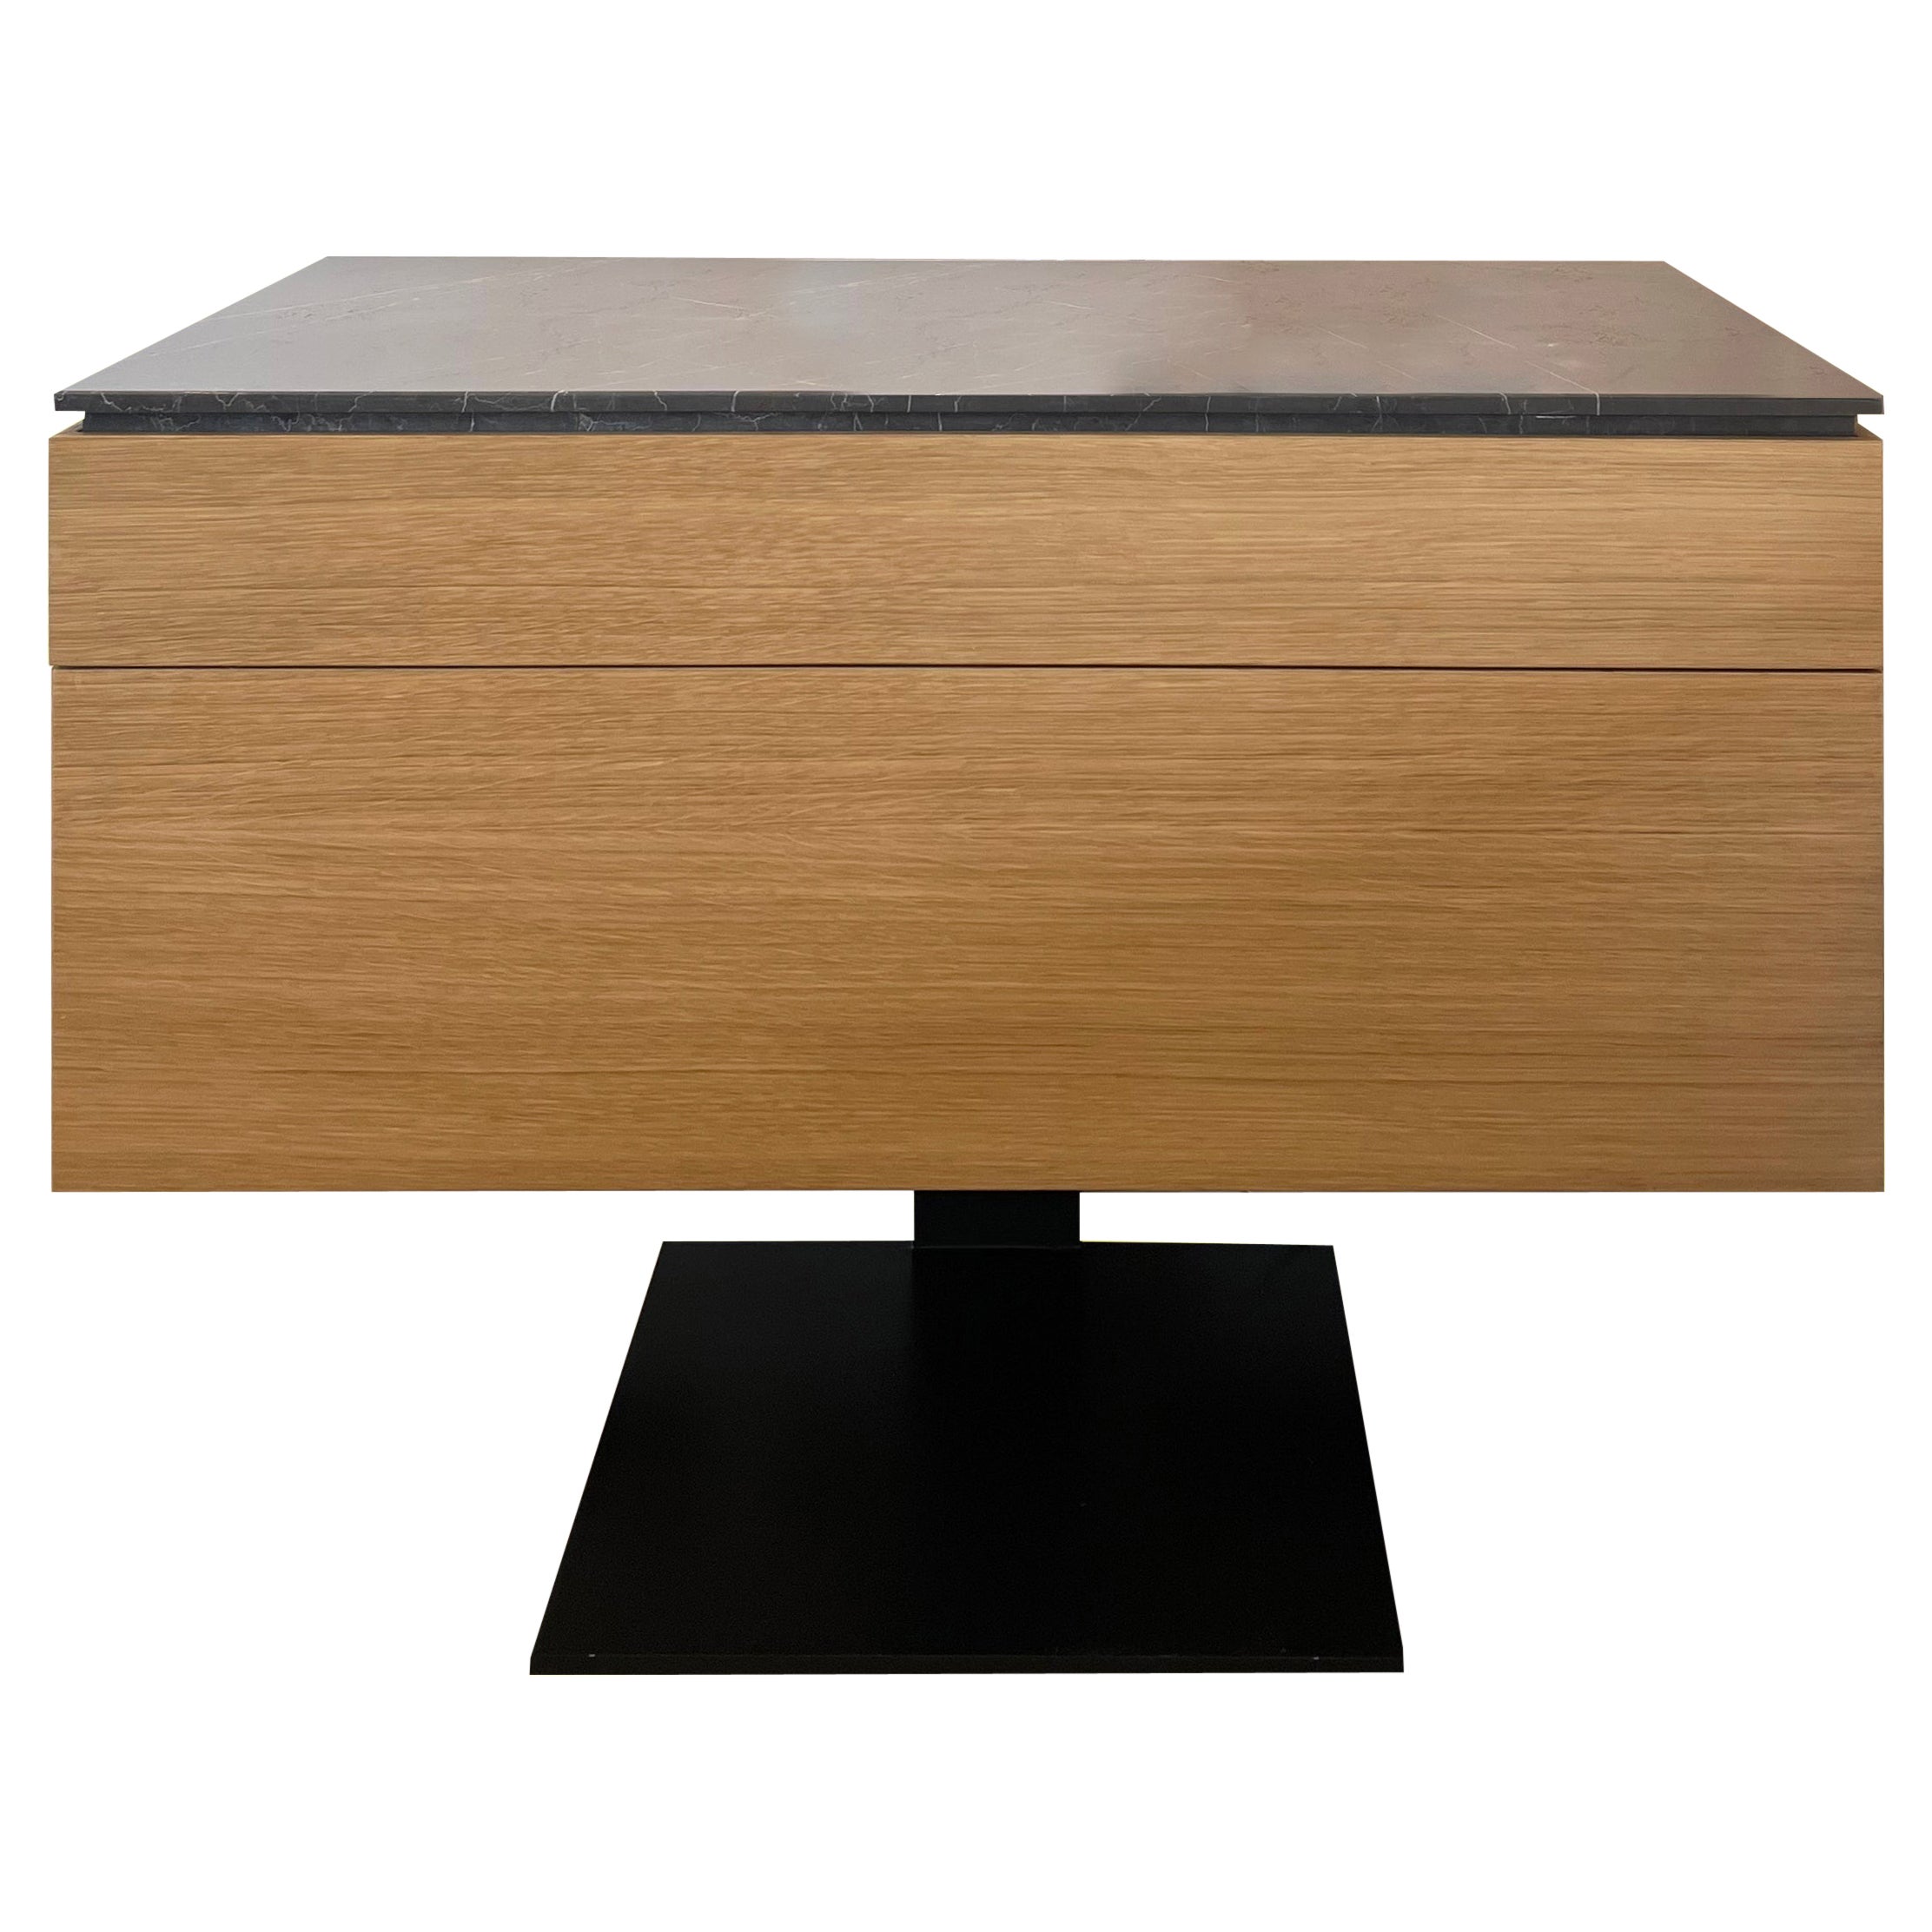 Bedside Table With Drawers in Maple Veneer, Black Marble Top And Metal Leg For Sale